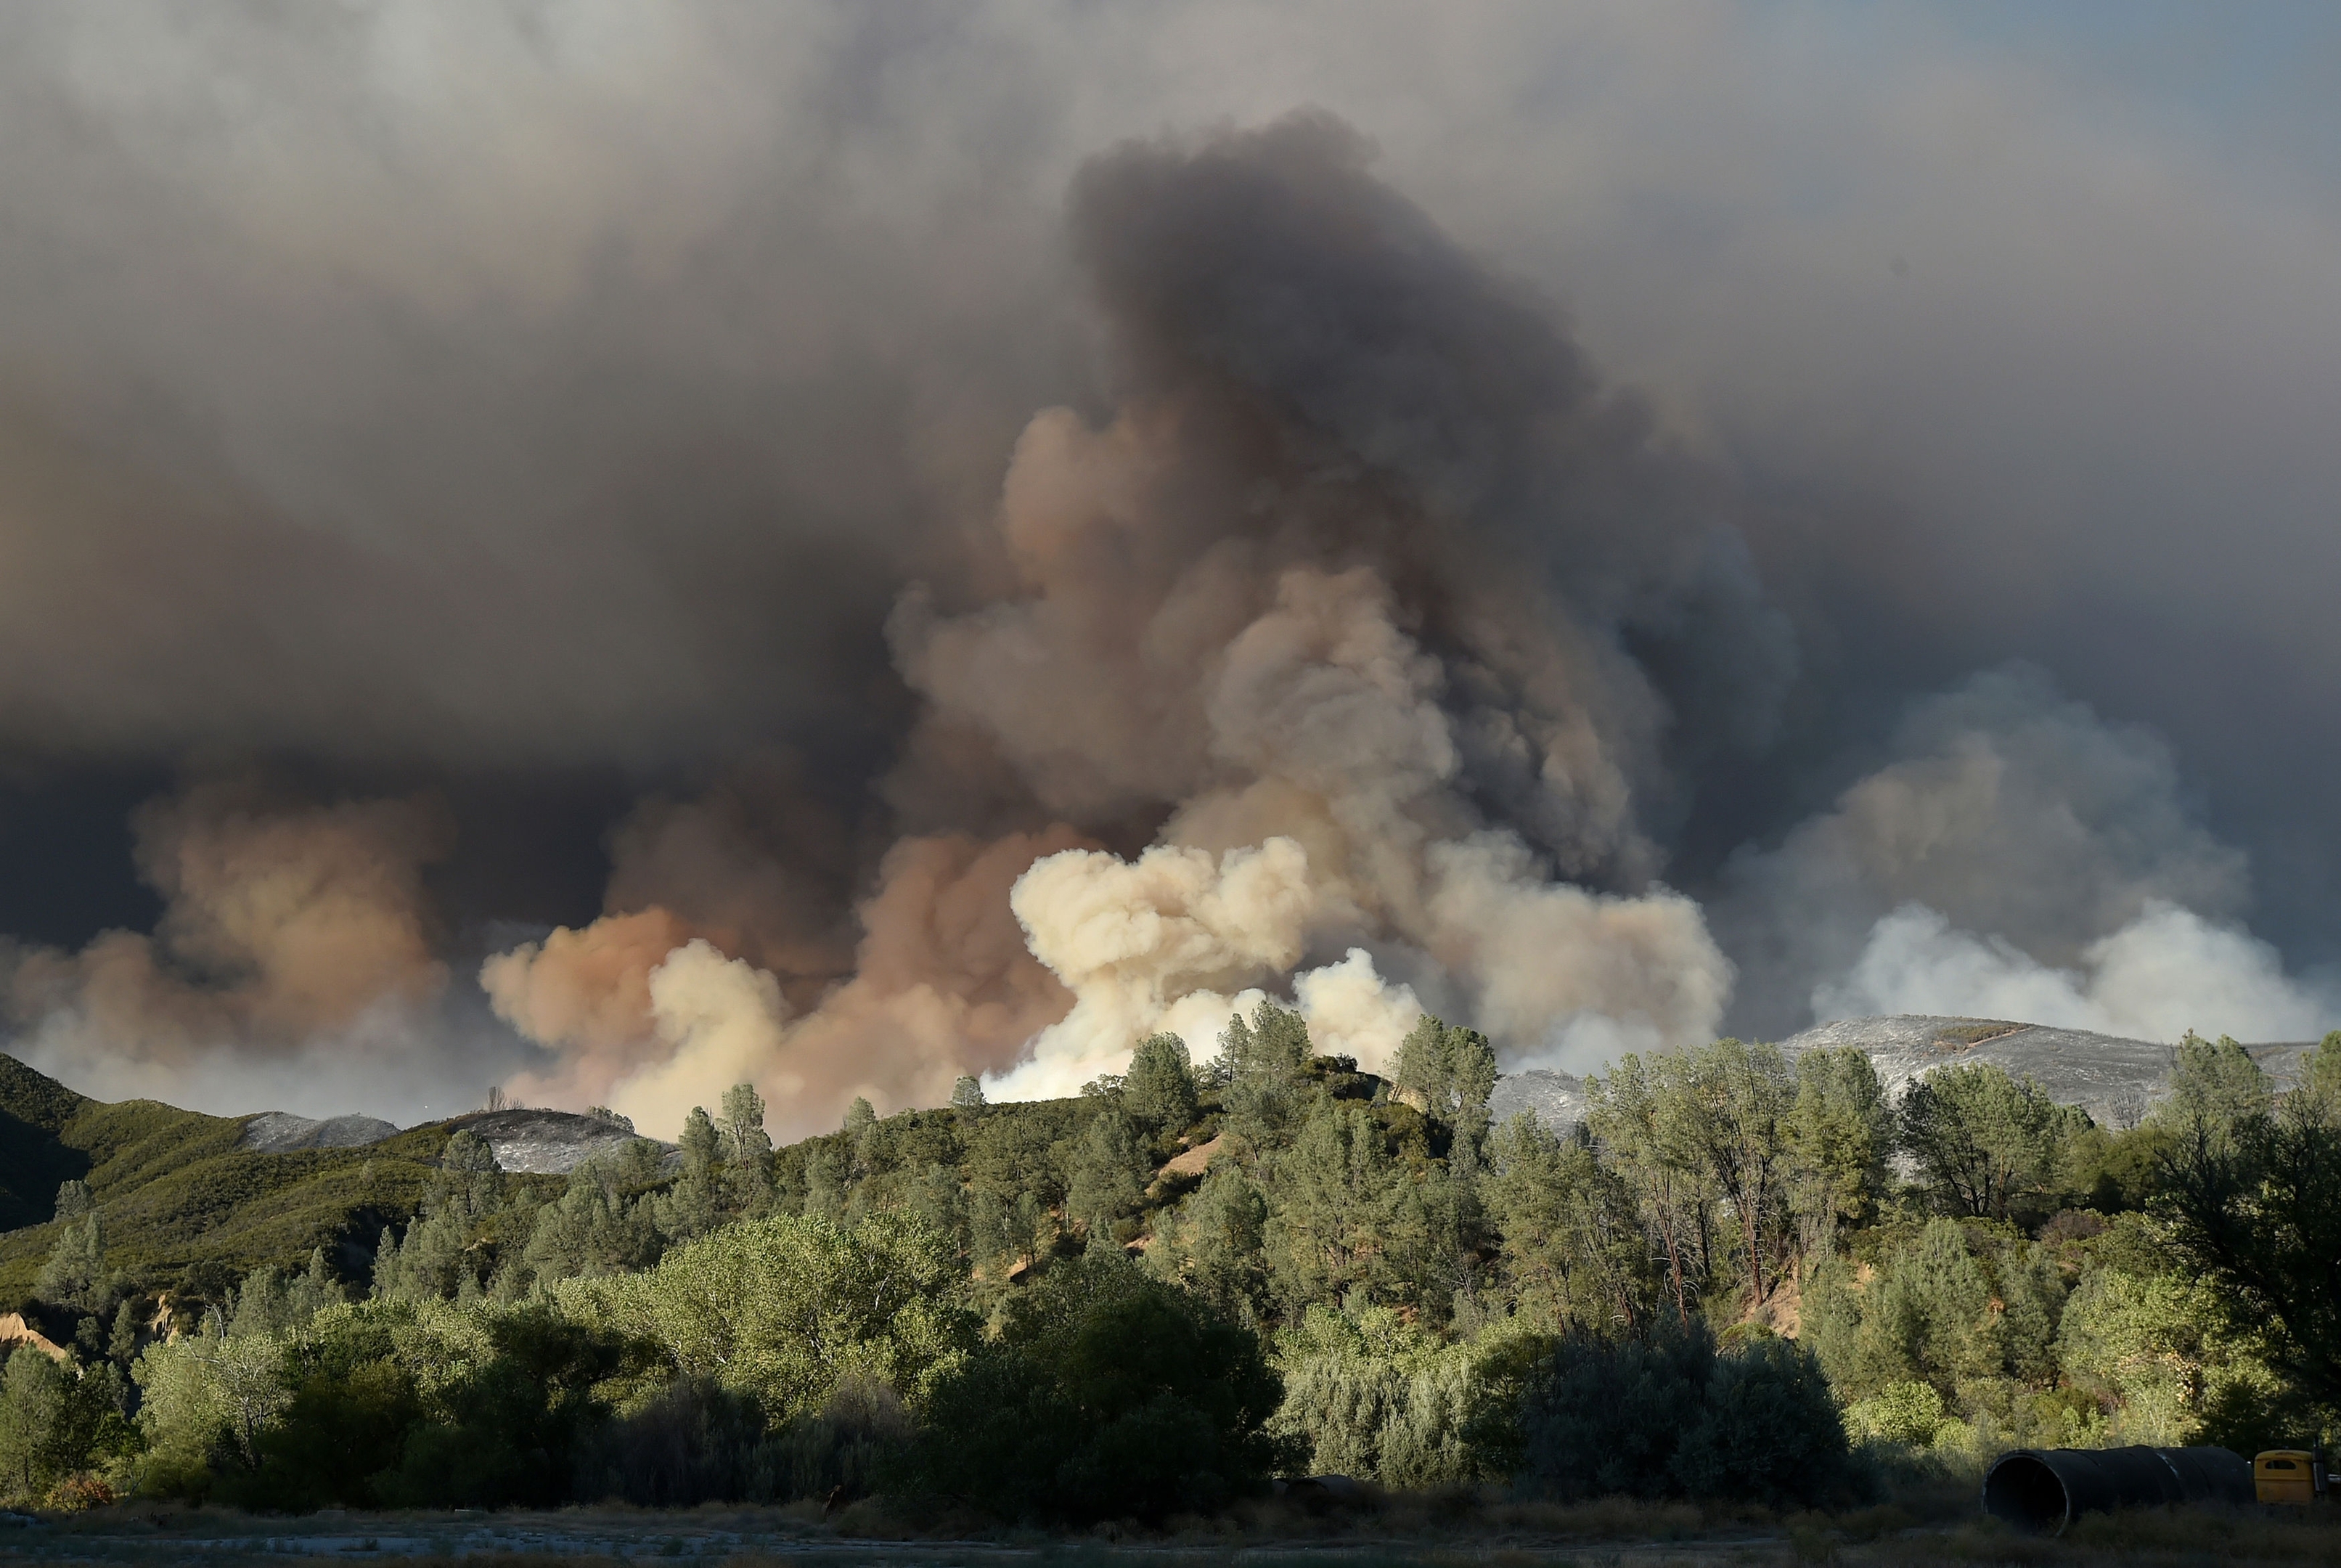 A plume of smoke rises above a hillside as the Rocky Fire burns near Clearlake, Calif., on Monday, Aug. 3, 2015. The fire has charred more than 60,000 acres and destroyed at least 24 residences. (AP Photo/Josh Edelson)